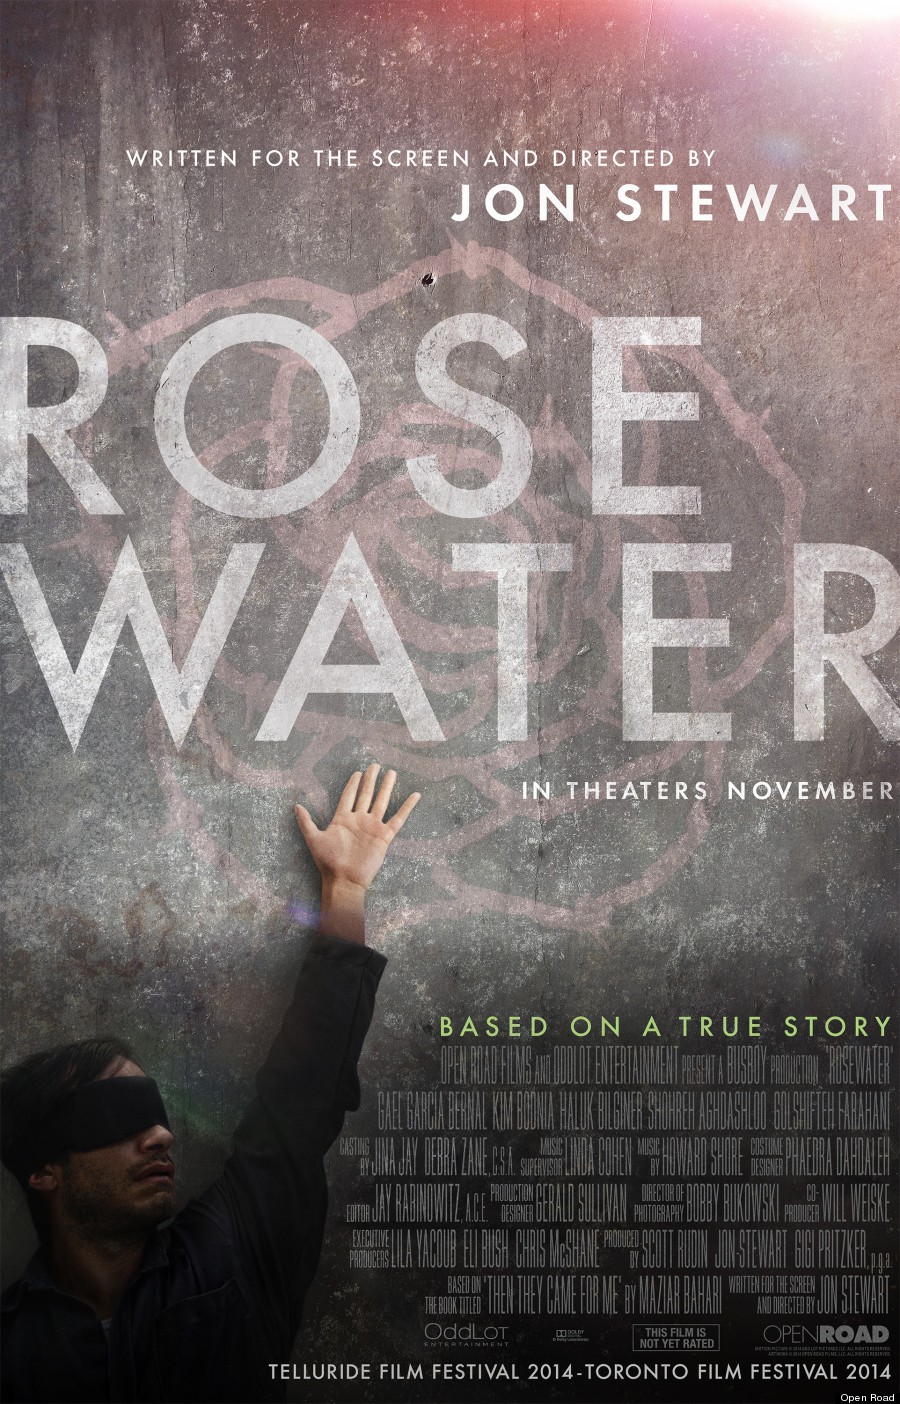 “Rosewater” Trailer Offers Harrowing Reality